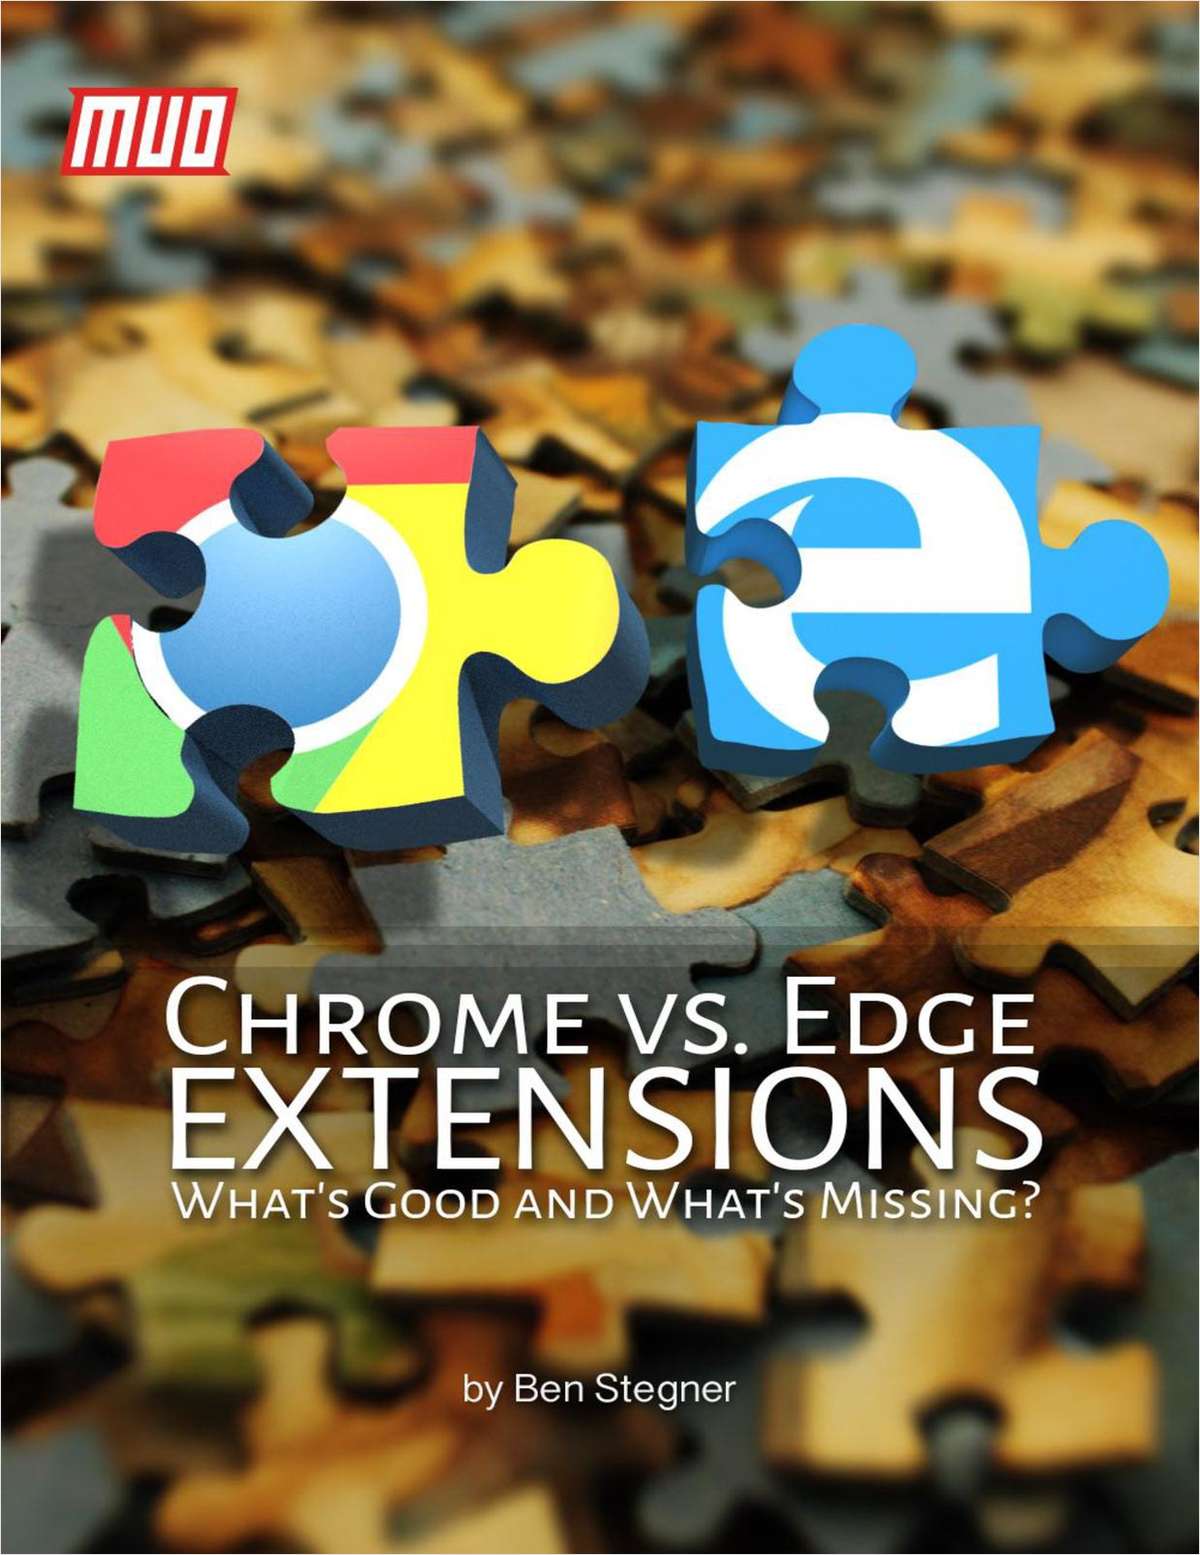 The Complete List of Microsoft Edge Browser Extensions